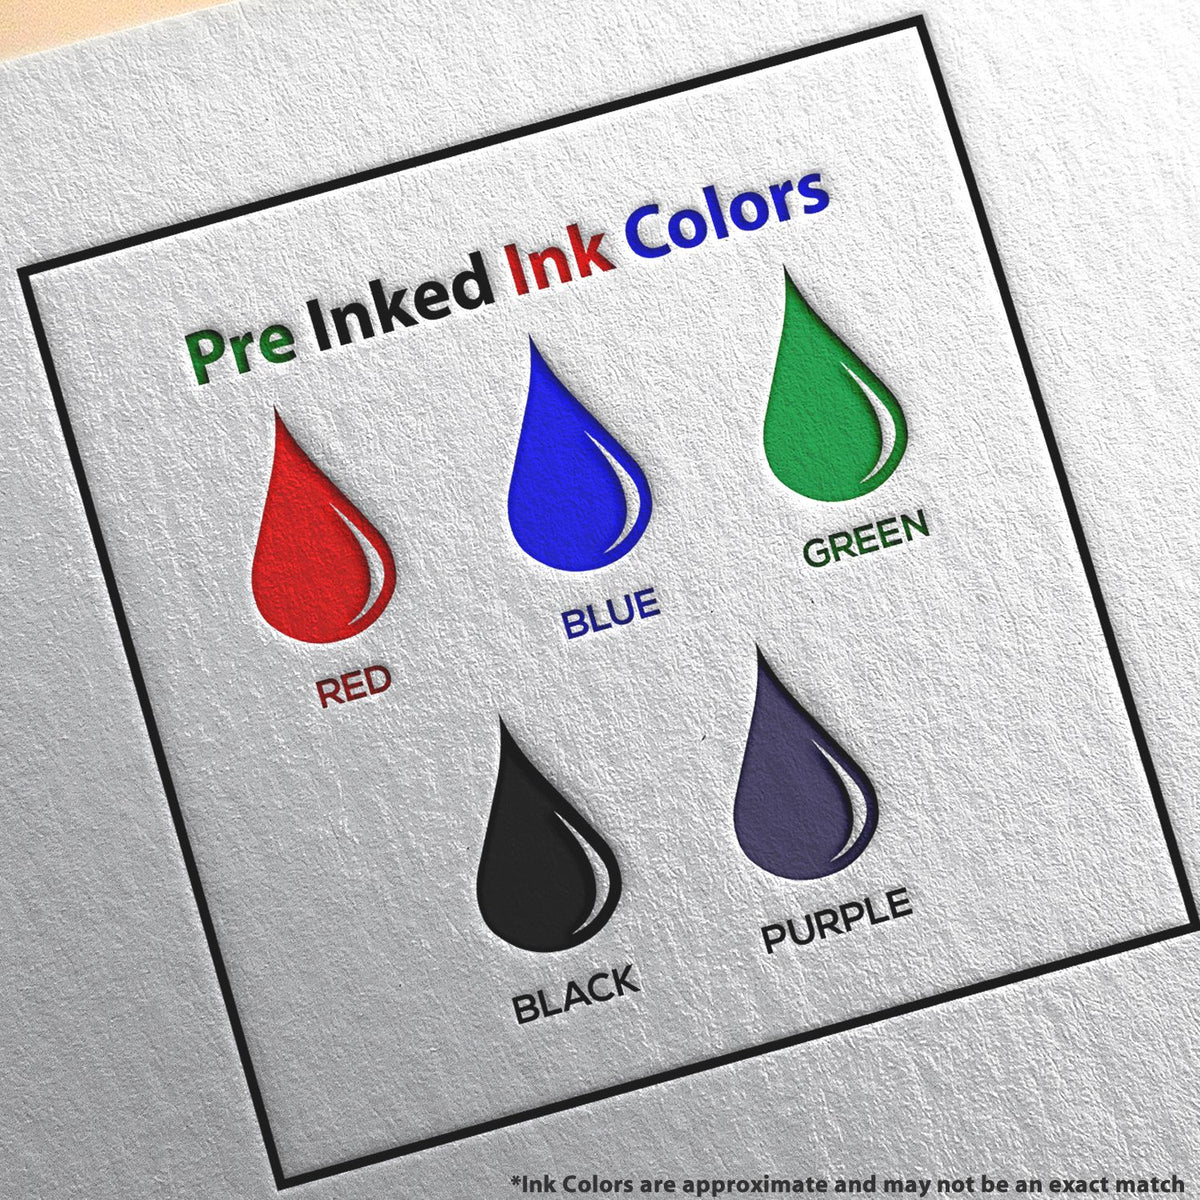 A picture showing the different ink colors or hues available for the Super Slim Pennsylvania Notary Public Stamp product.